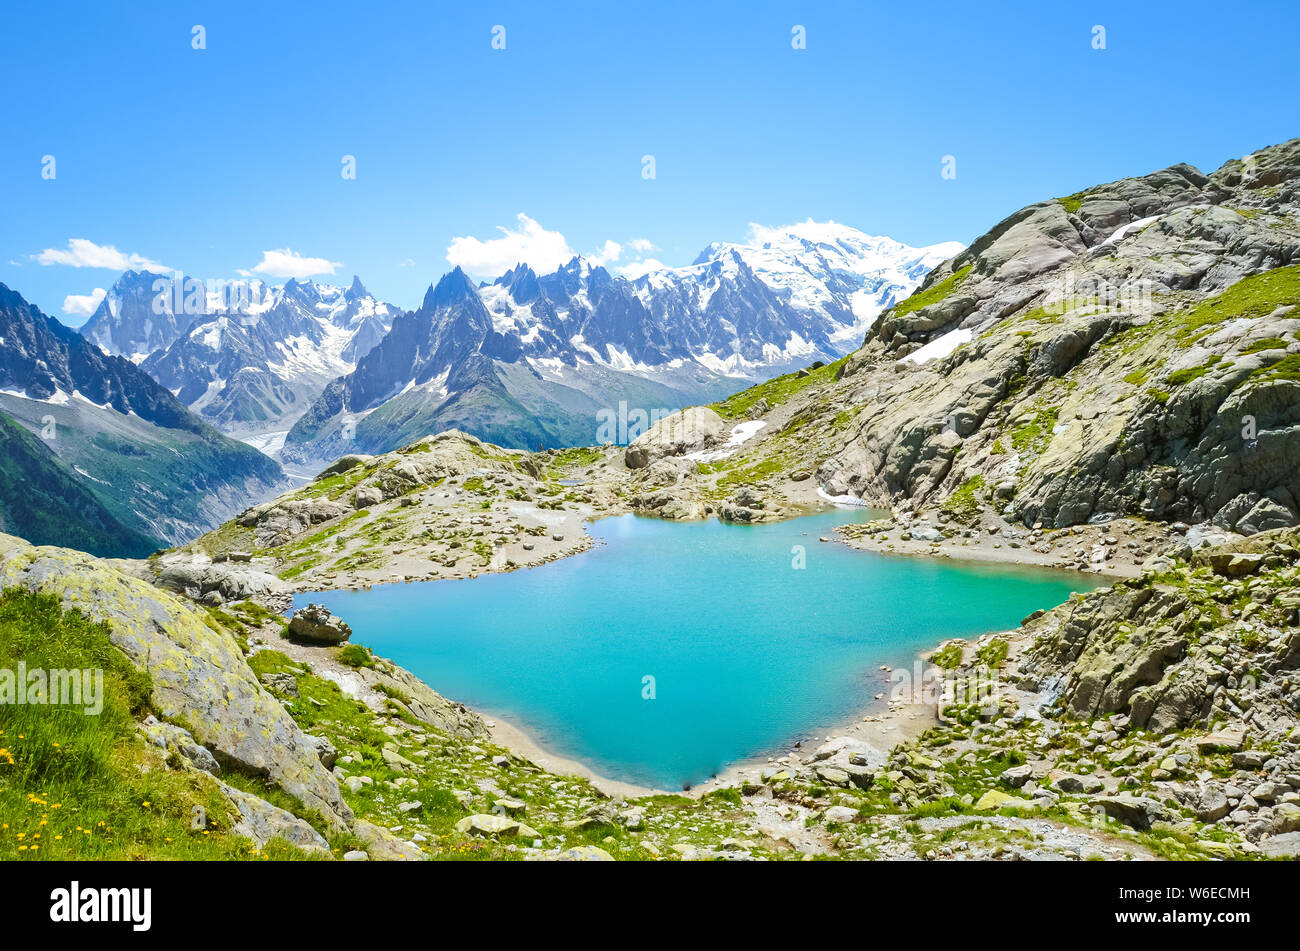 Beautiful landscape of French Alps. Turquoise Lake Blanc, in French Lac Blanc photographed on a sunny summer day with Mont Blanc and other high Alpine mountains in background. Amazing nature, France. Stock Photo